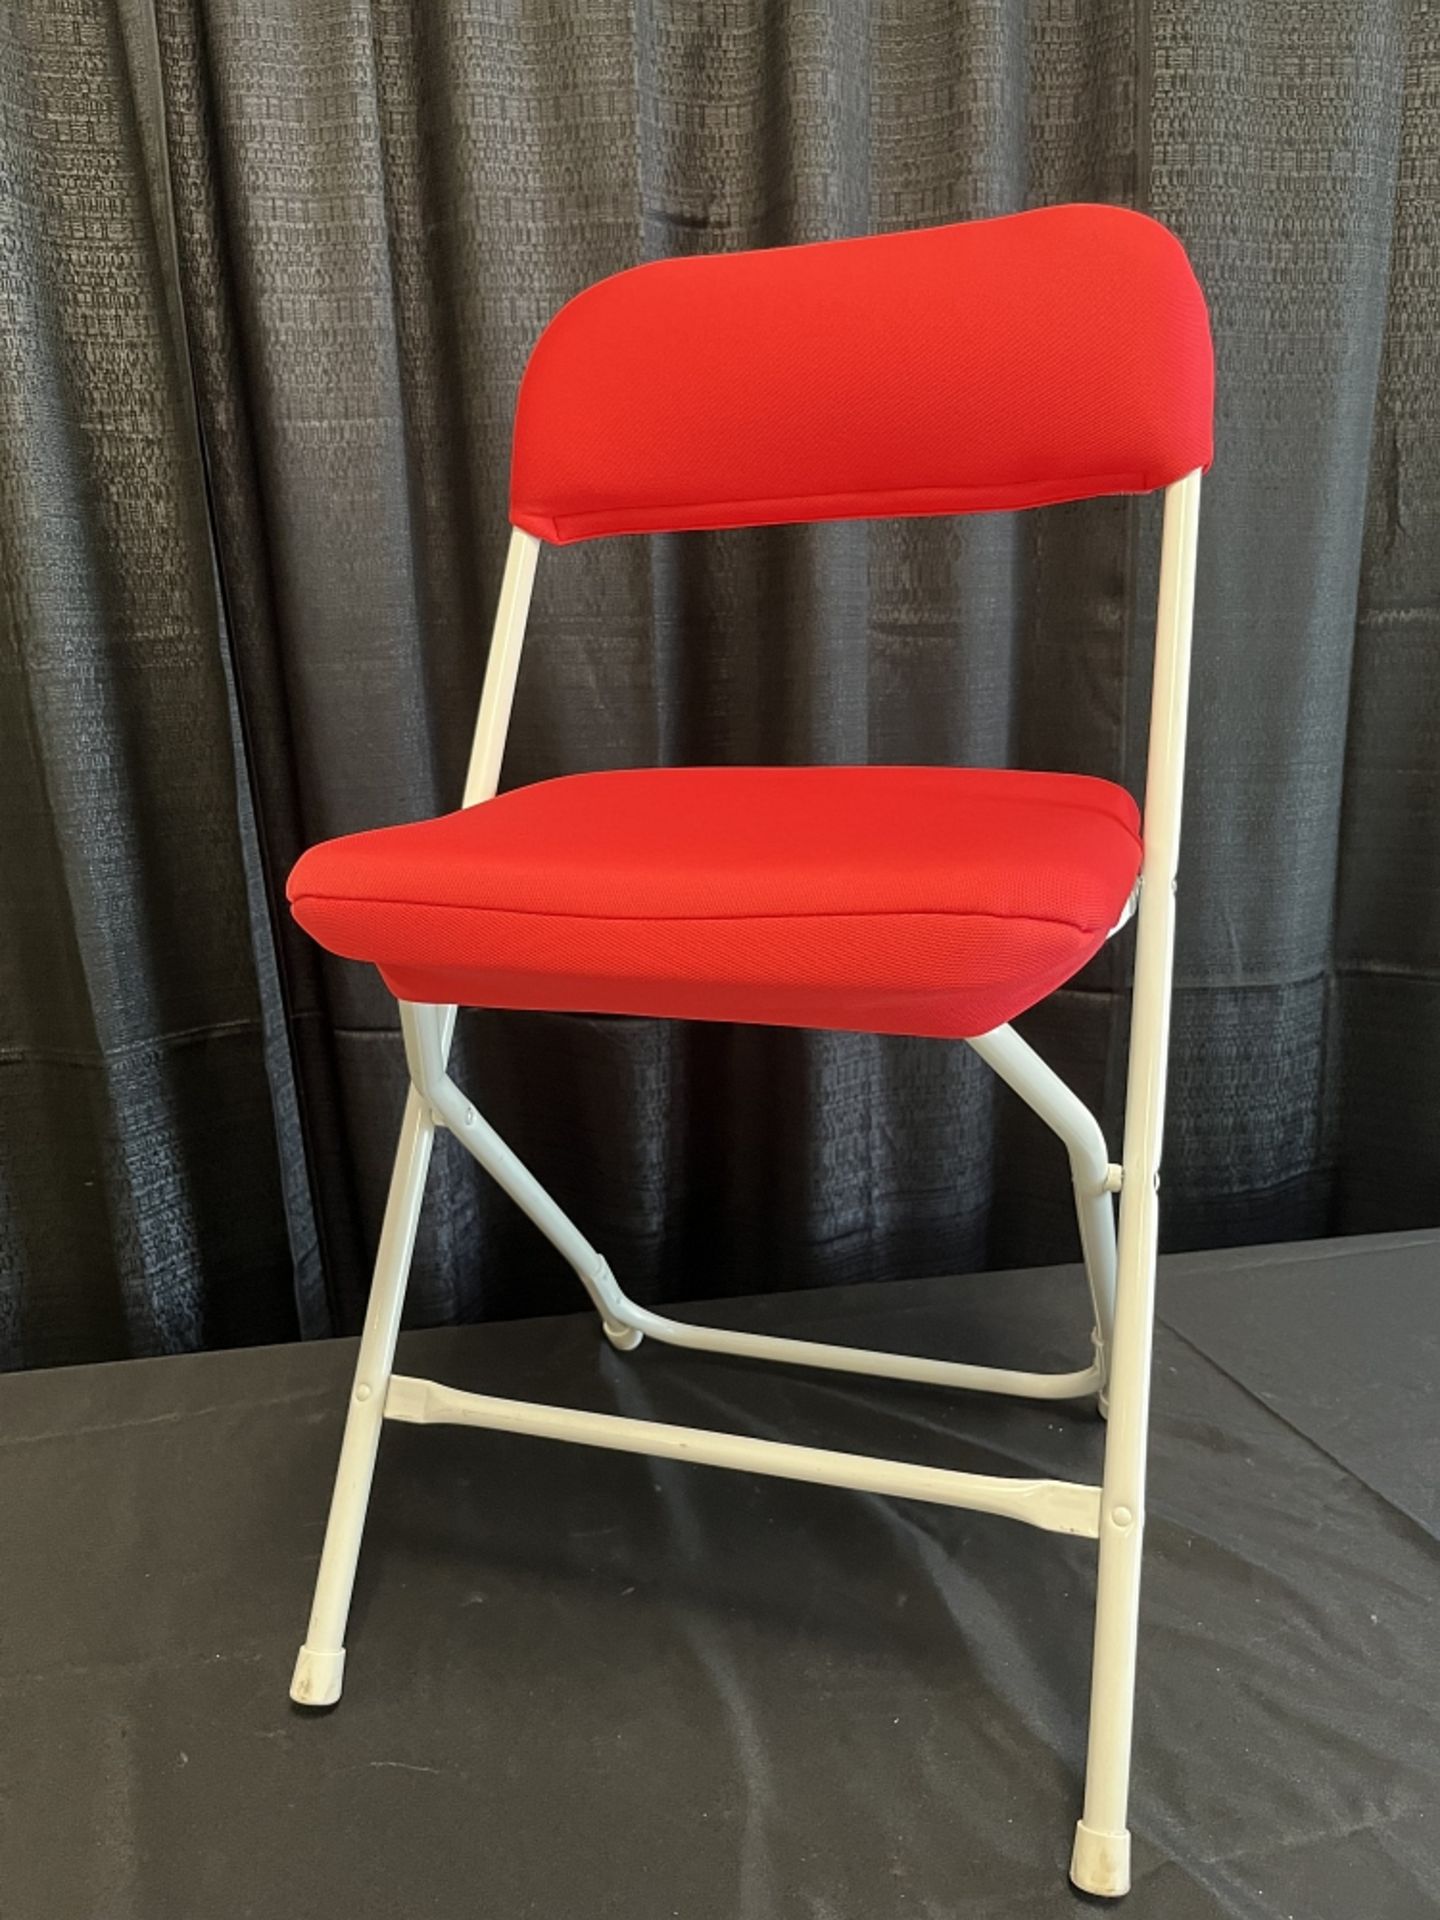 Chair Pad- Standard Back color: Red